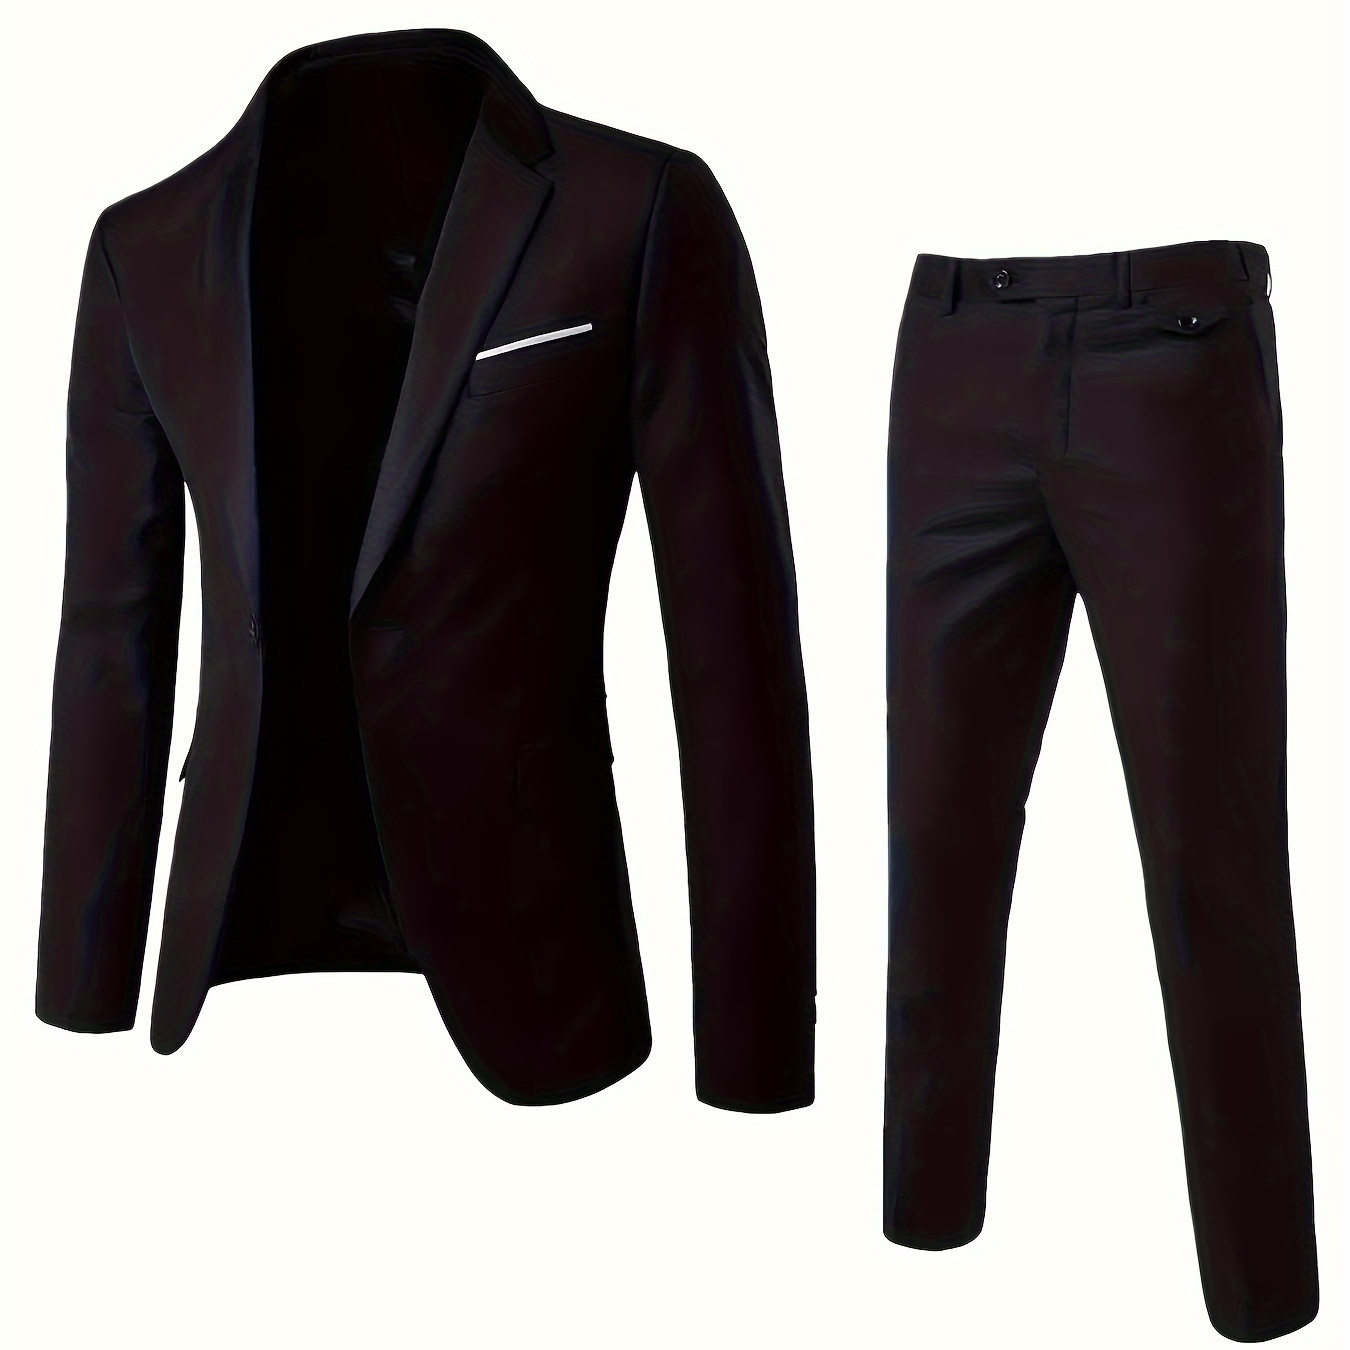 

Men's Business Casual Suit Set, 2-piece Blazer And Dress Pants, Office Style, Jacket And Trousers